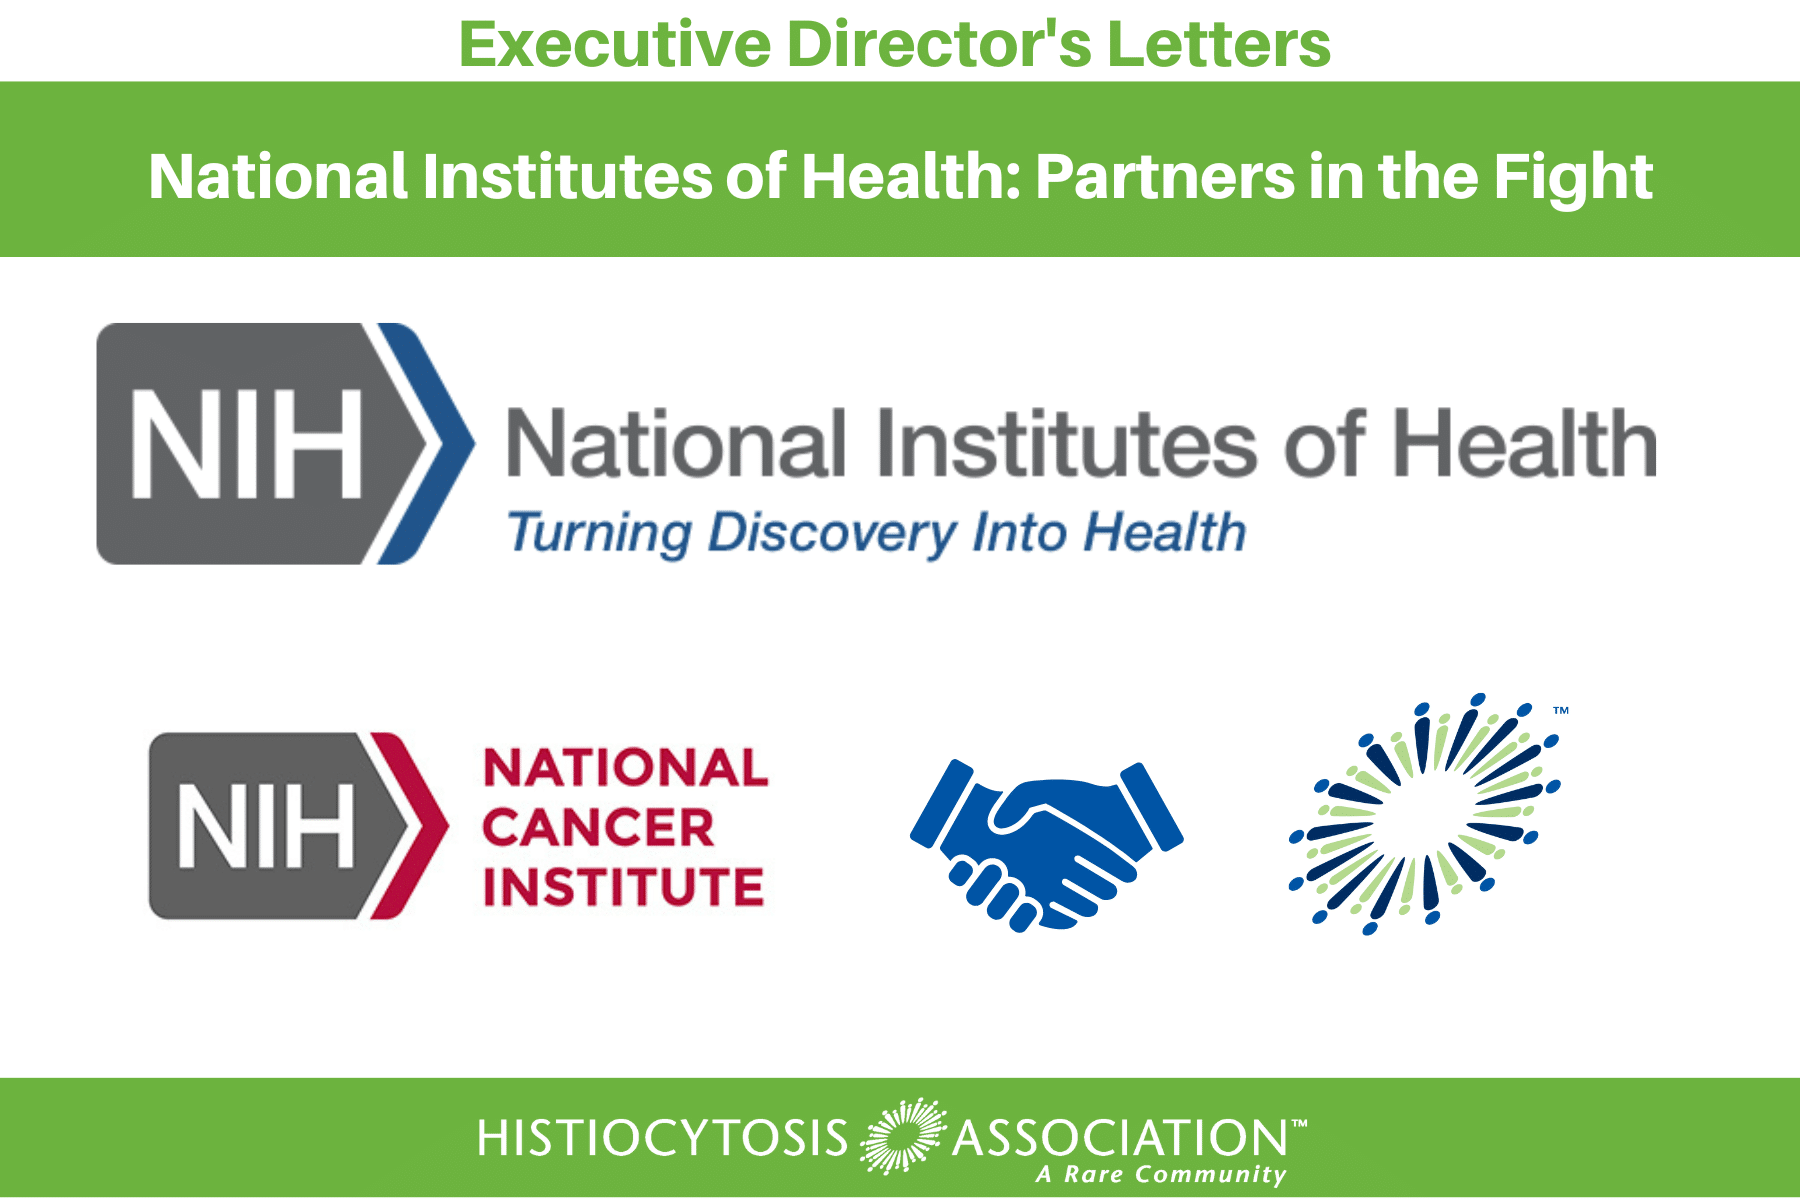 National Institutes of Health Partnerships and rare disease education